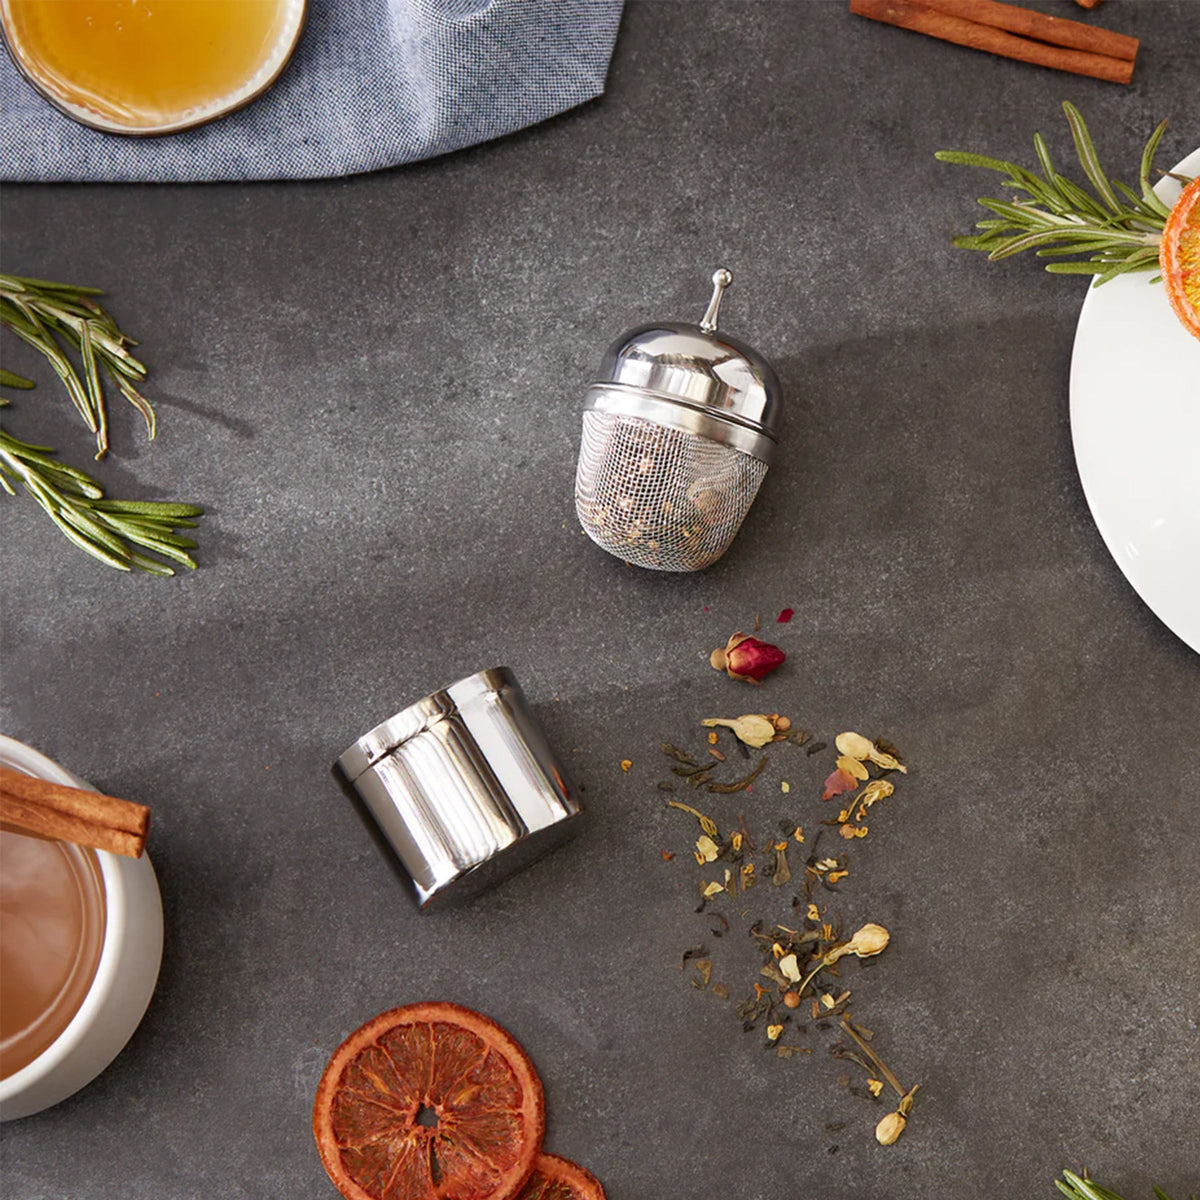 A RSVP International stainless steel reusable Floating Tea Infuser &amp; Caddy steeping loose leaf tea, complemented by cinnamon sticks and oranges on a table.